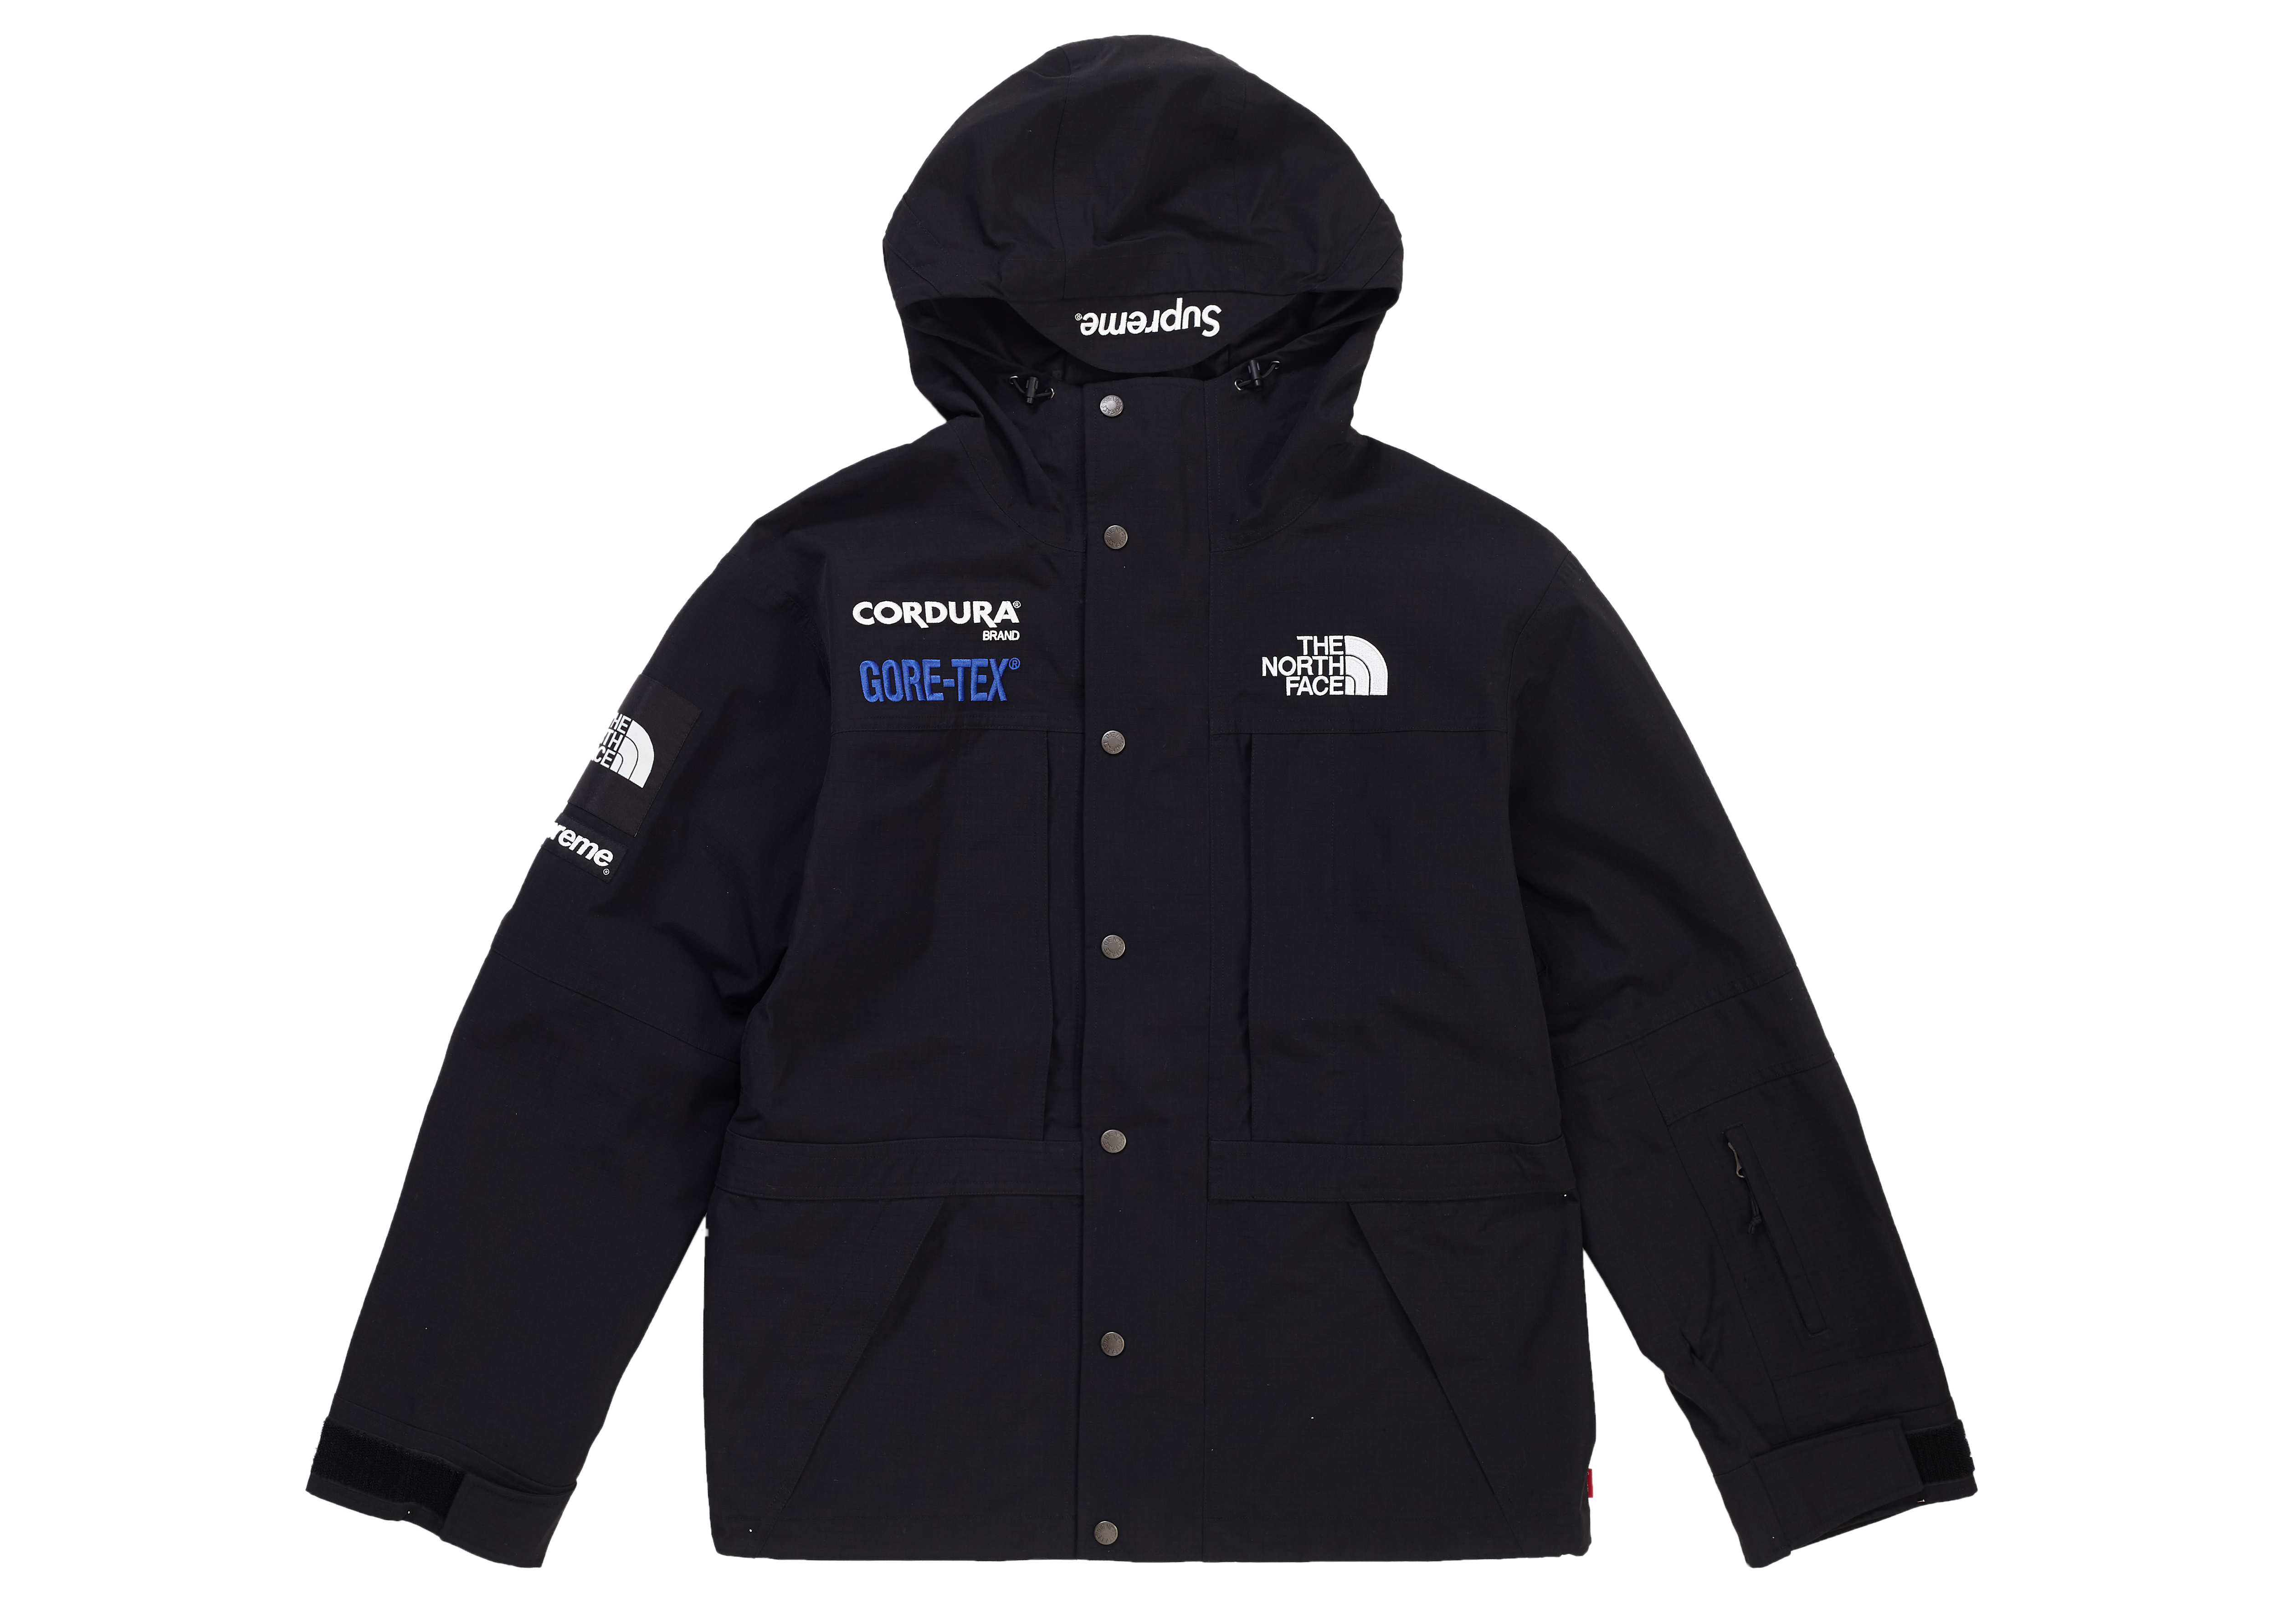 supreme tnf expedition jacket